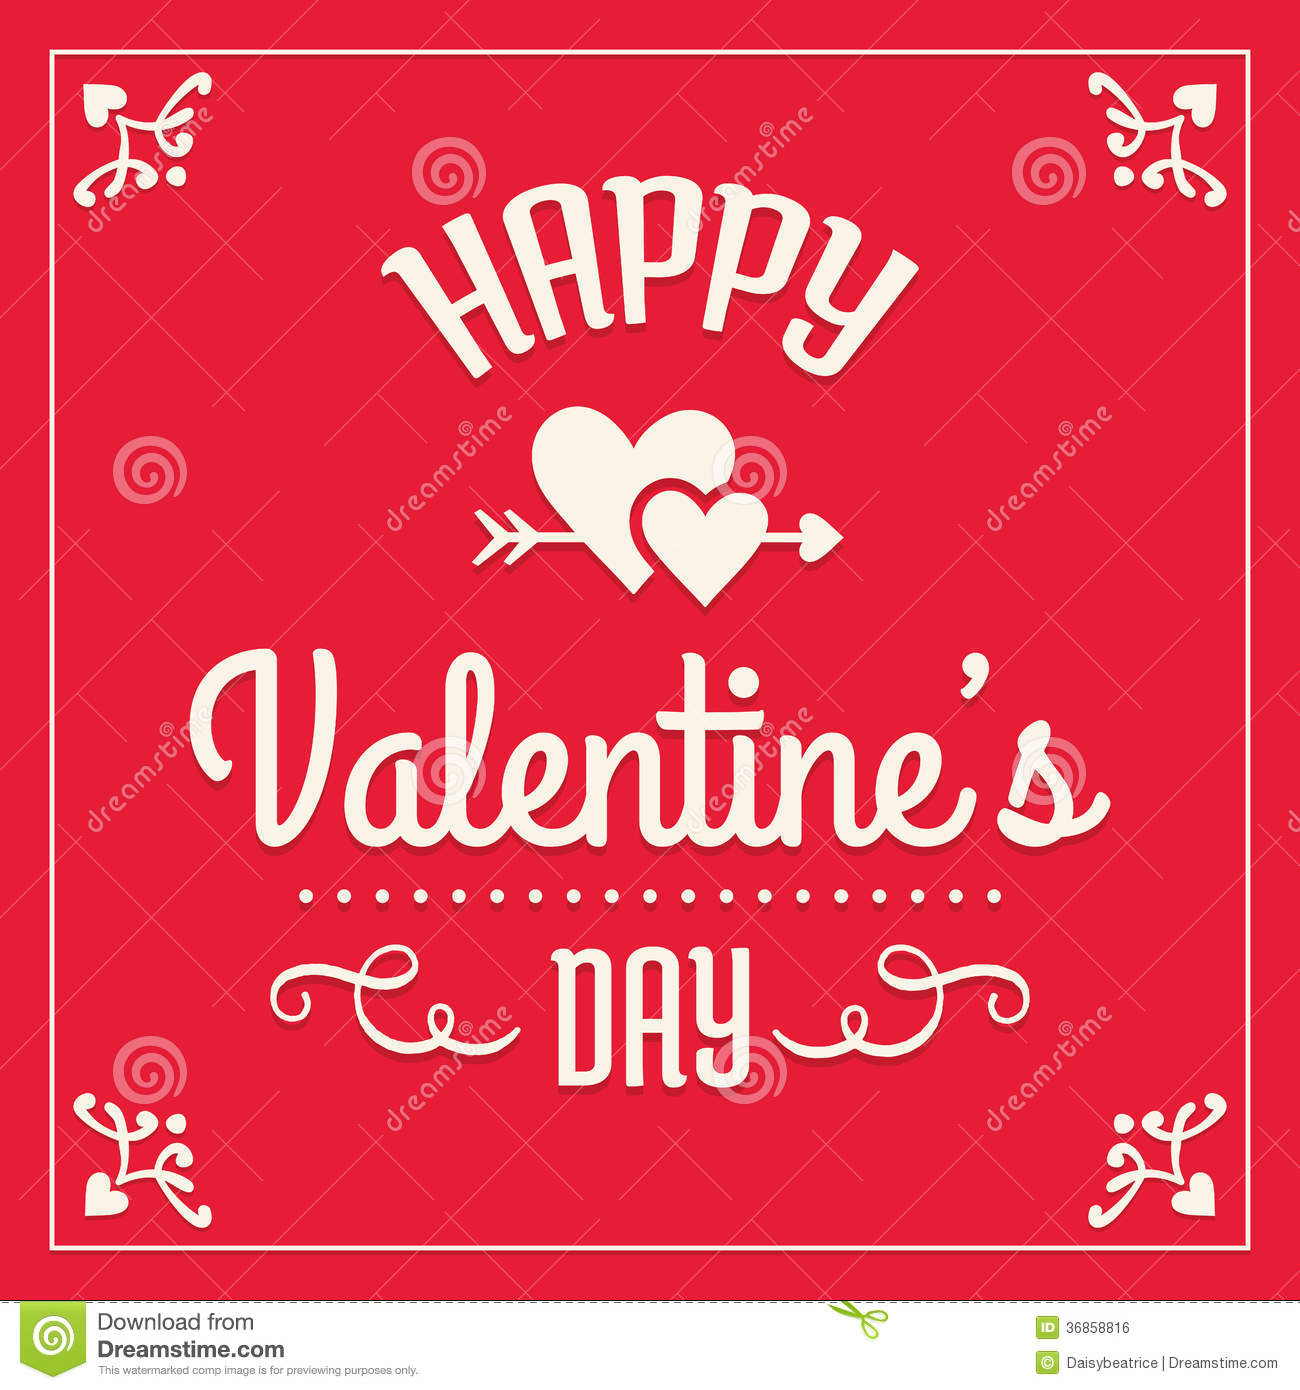 Happy Valentines Day Card Stock Vector. Illustration Of Curl - 36858816 - Free Printable Valentines Day Cards For Her